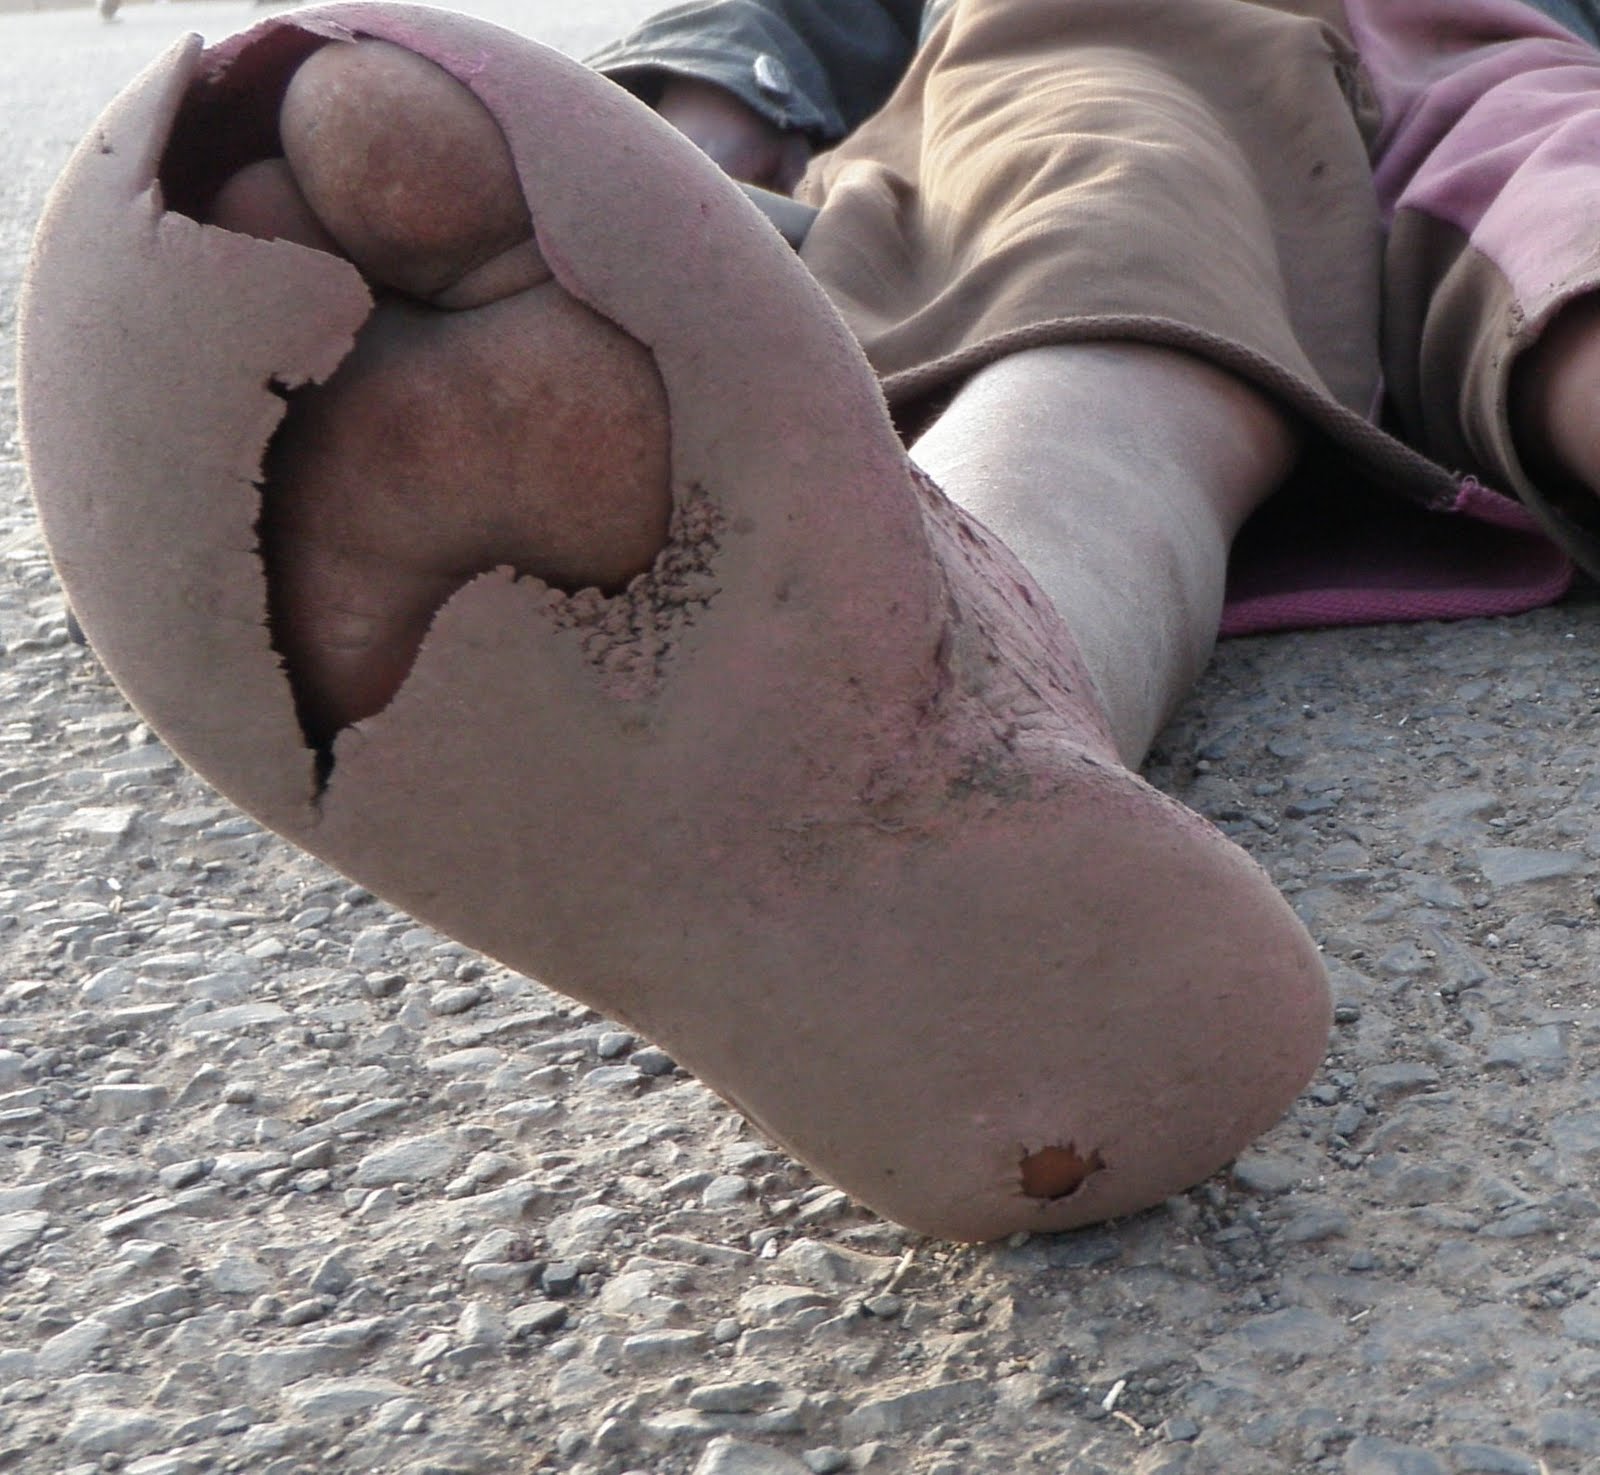 ... kids at the care-points, who consider a pair of shoes to be a luxury